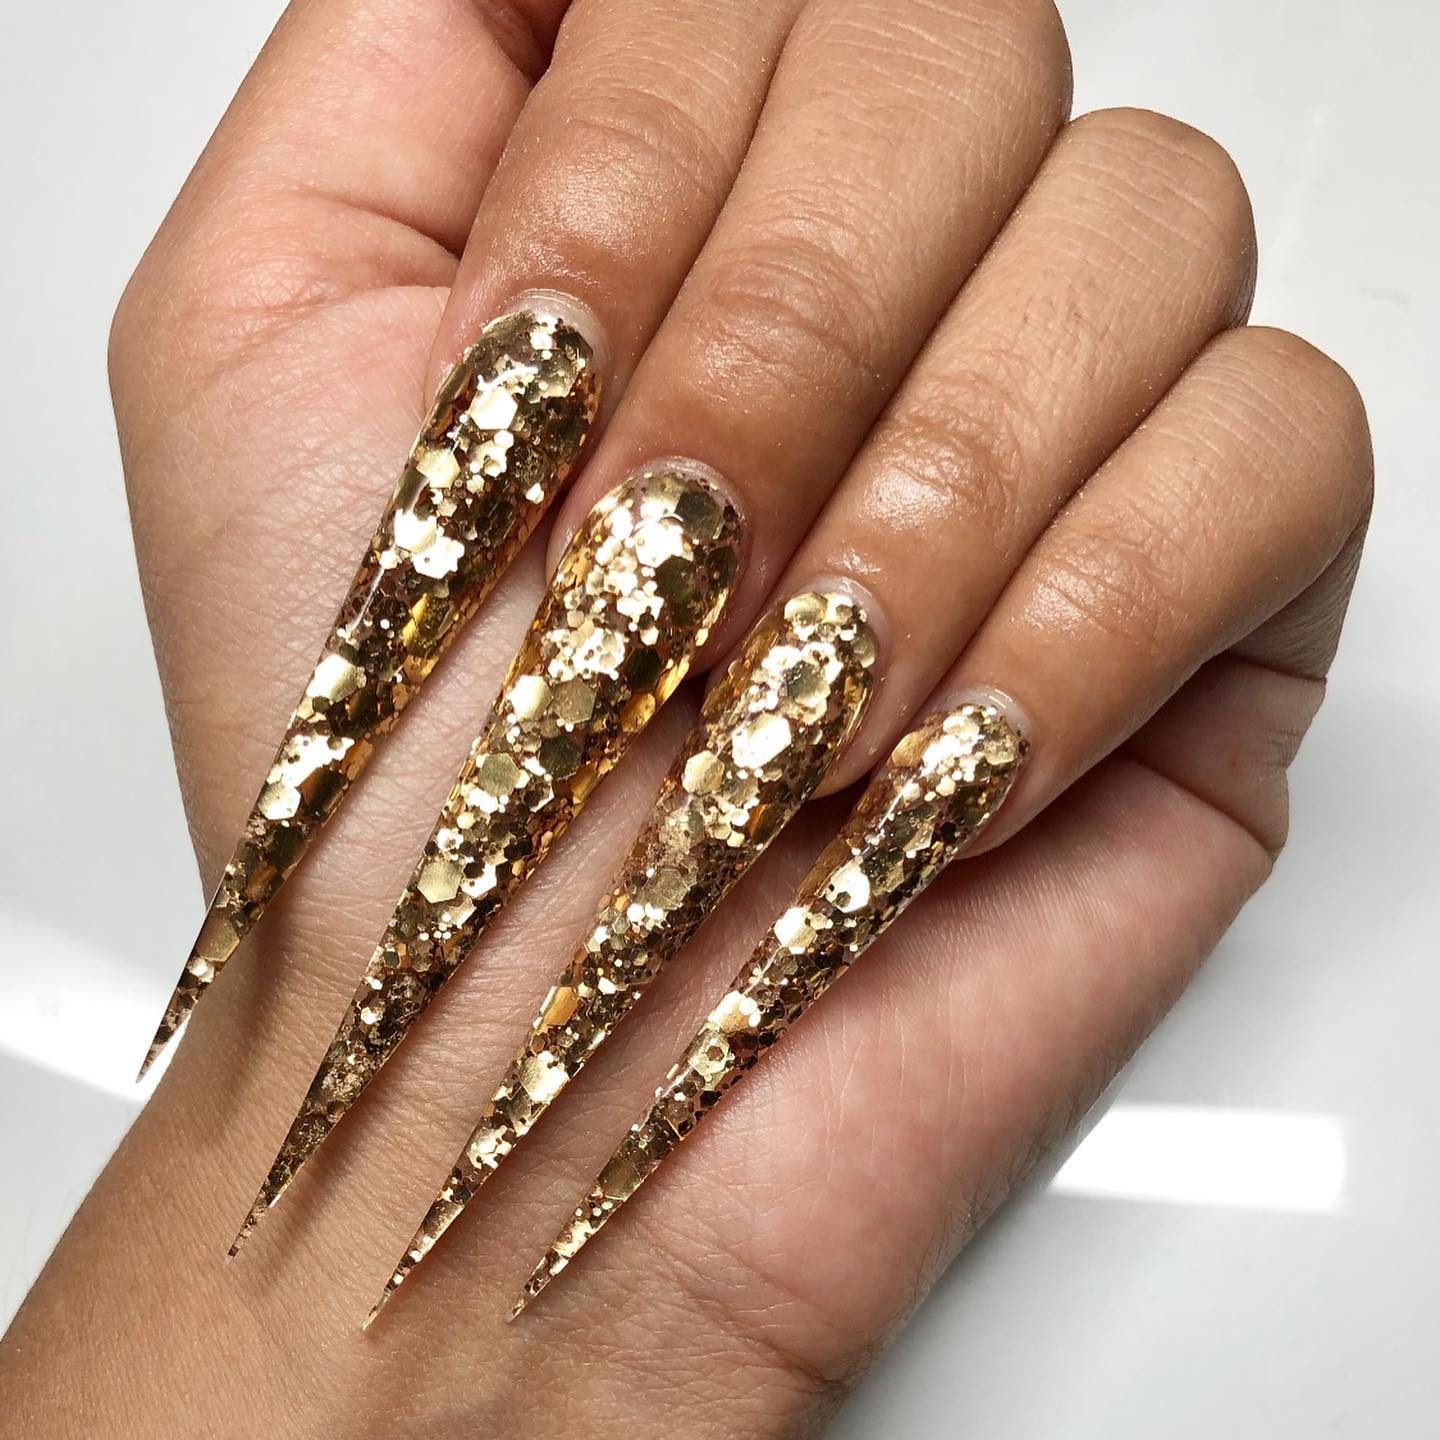 Very Long Stiletto Nails with Gold Glitter